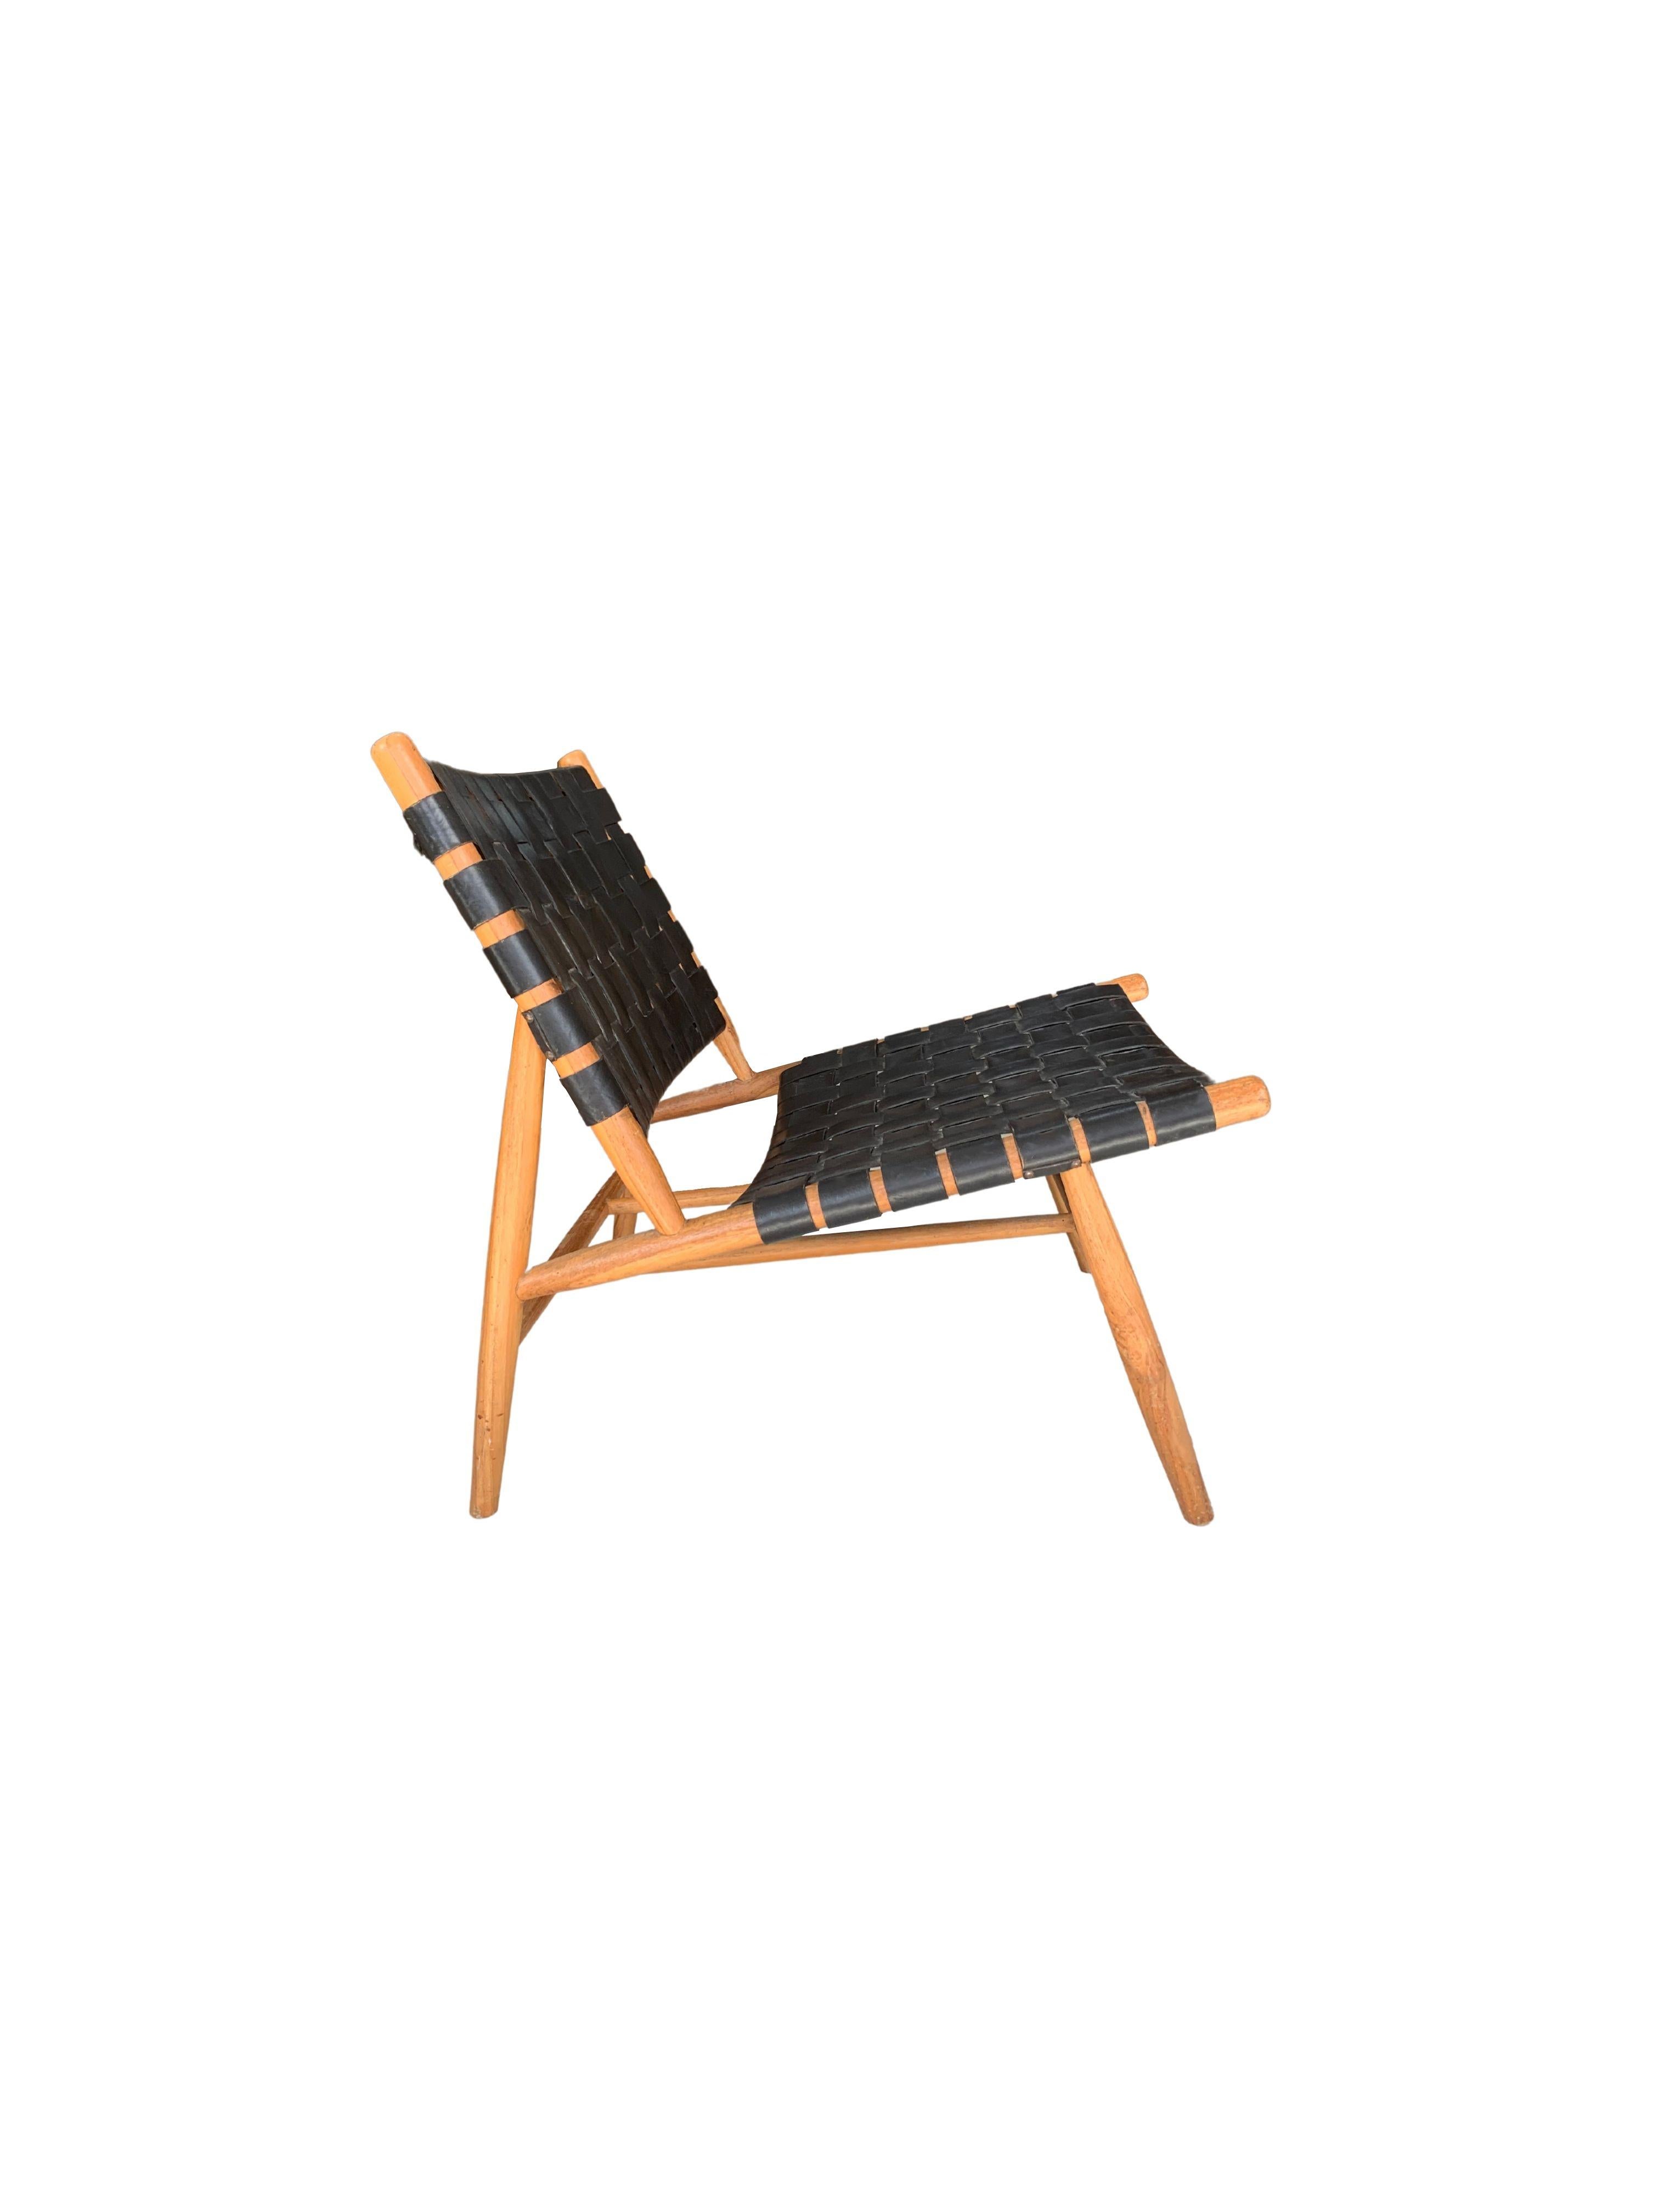 Modern Teak Wood Framed Lounge Chair, with Black Woven Leather Seat 